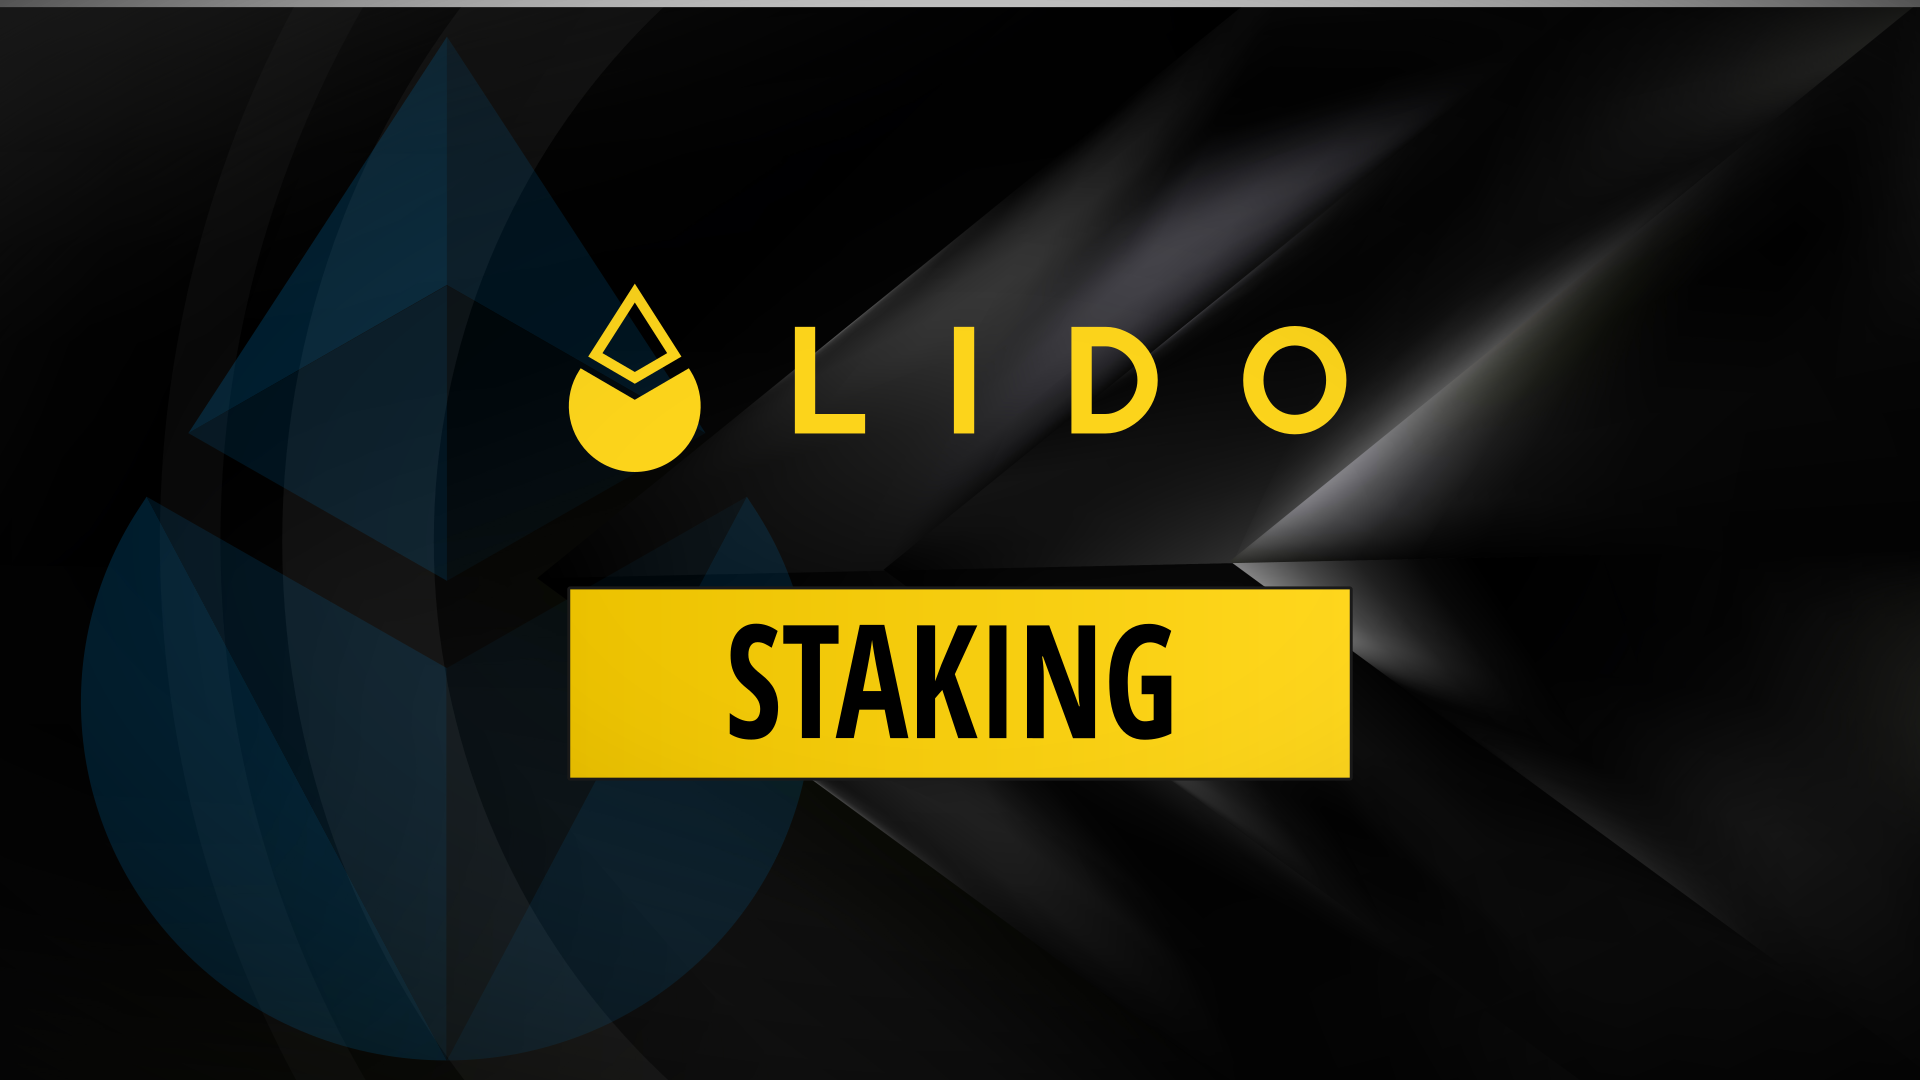 How To Stake Ethereum, Luna or Solana| LIDO Staking Tutorial